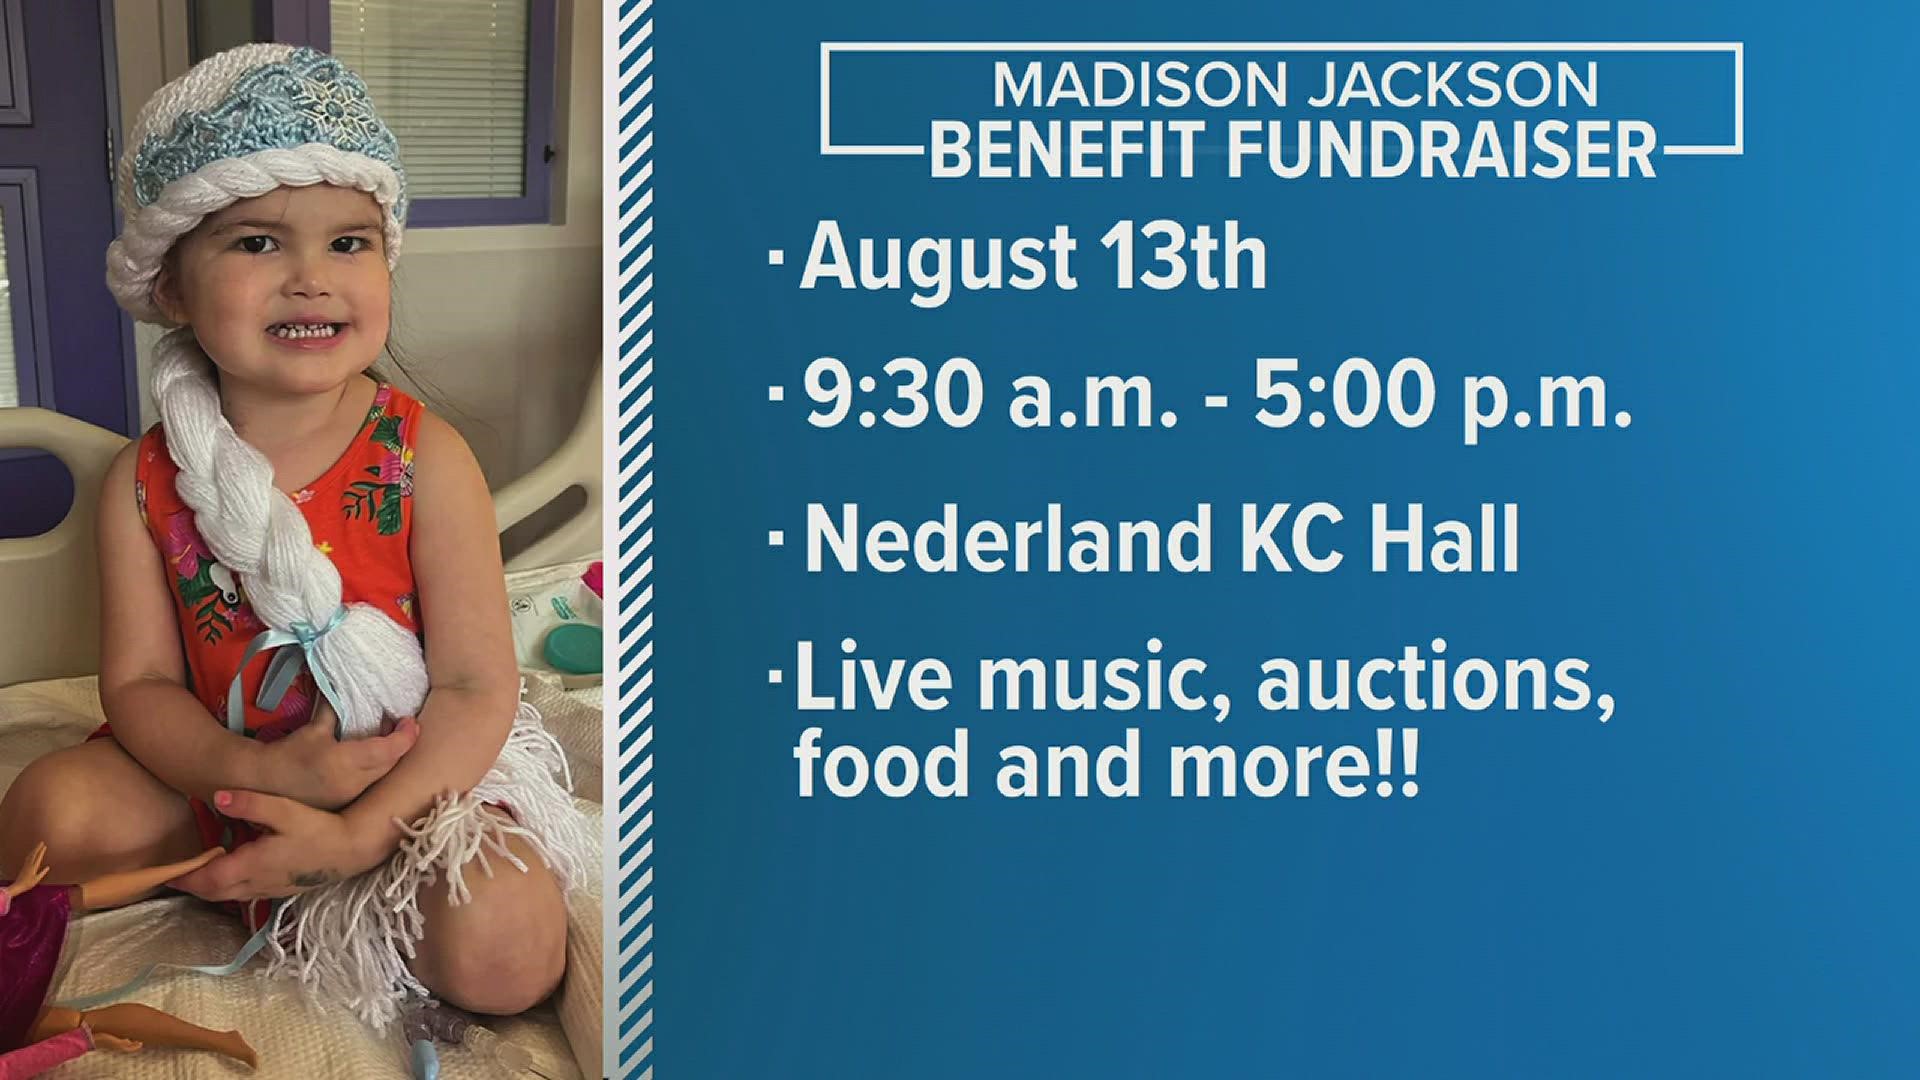 The benefit for Madison Jackson will run from 9:30 a.m. to 5 p.m. There will plenty of entertainment, like live music, auctions and plenty of food.